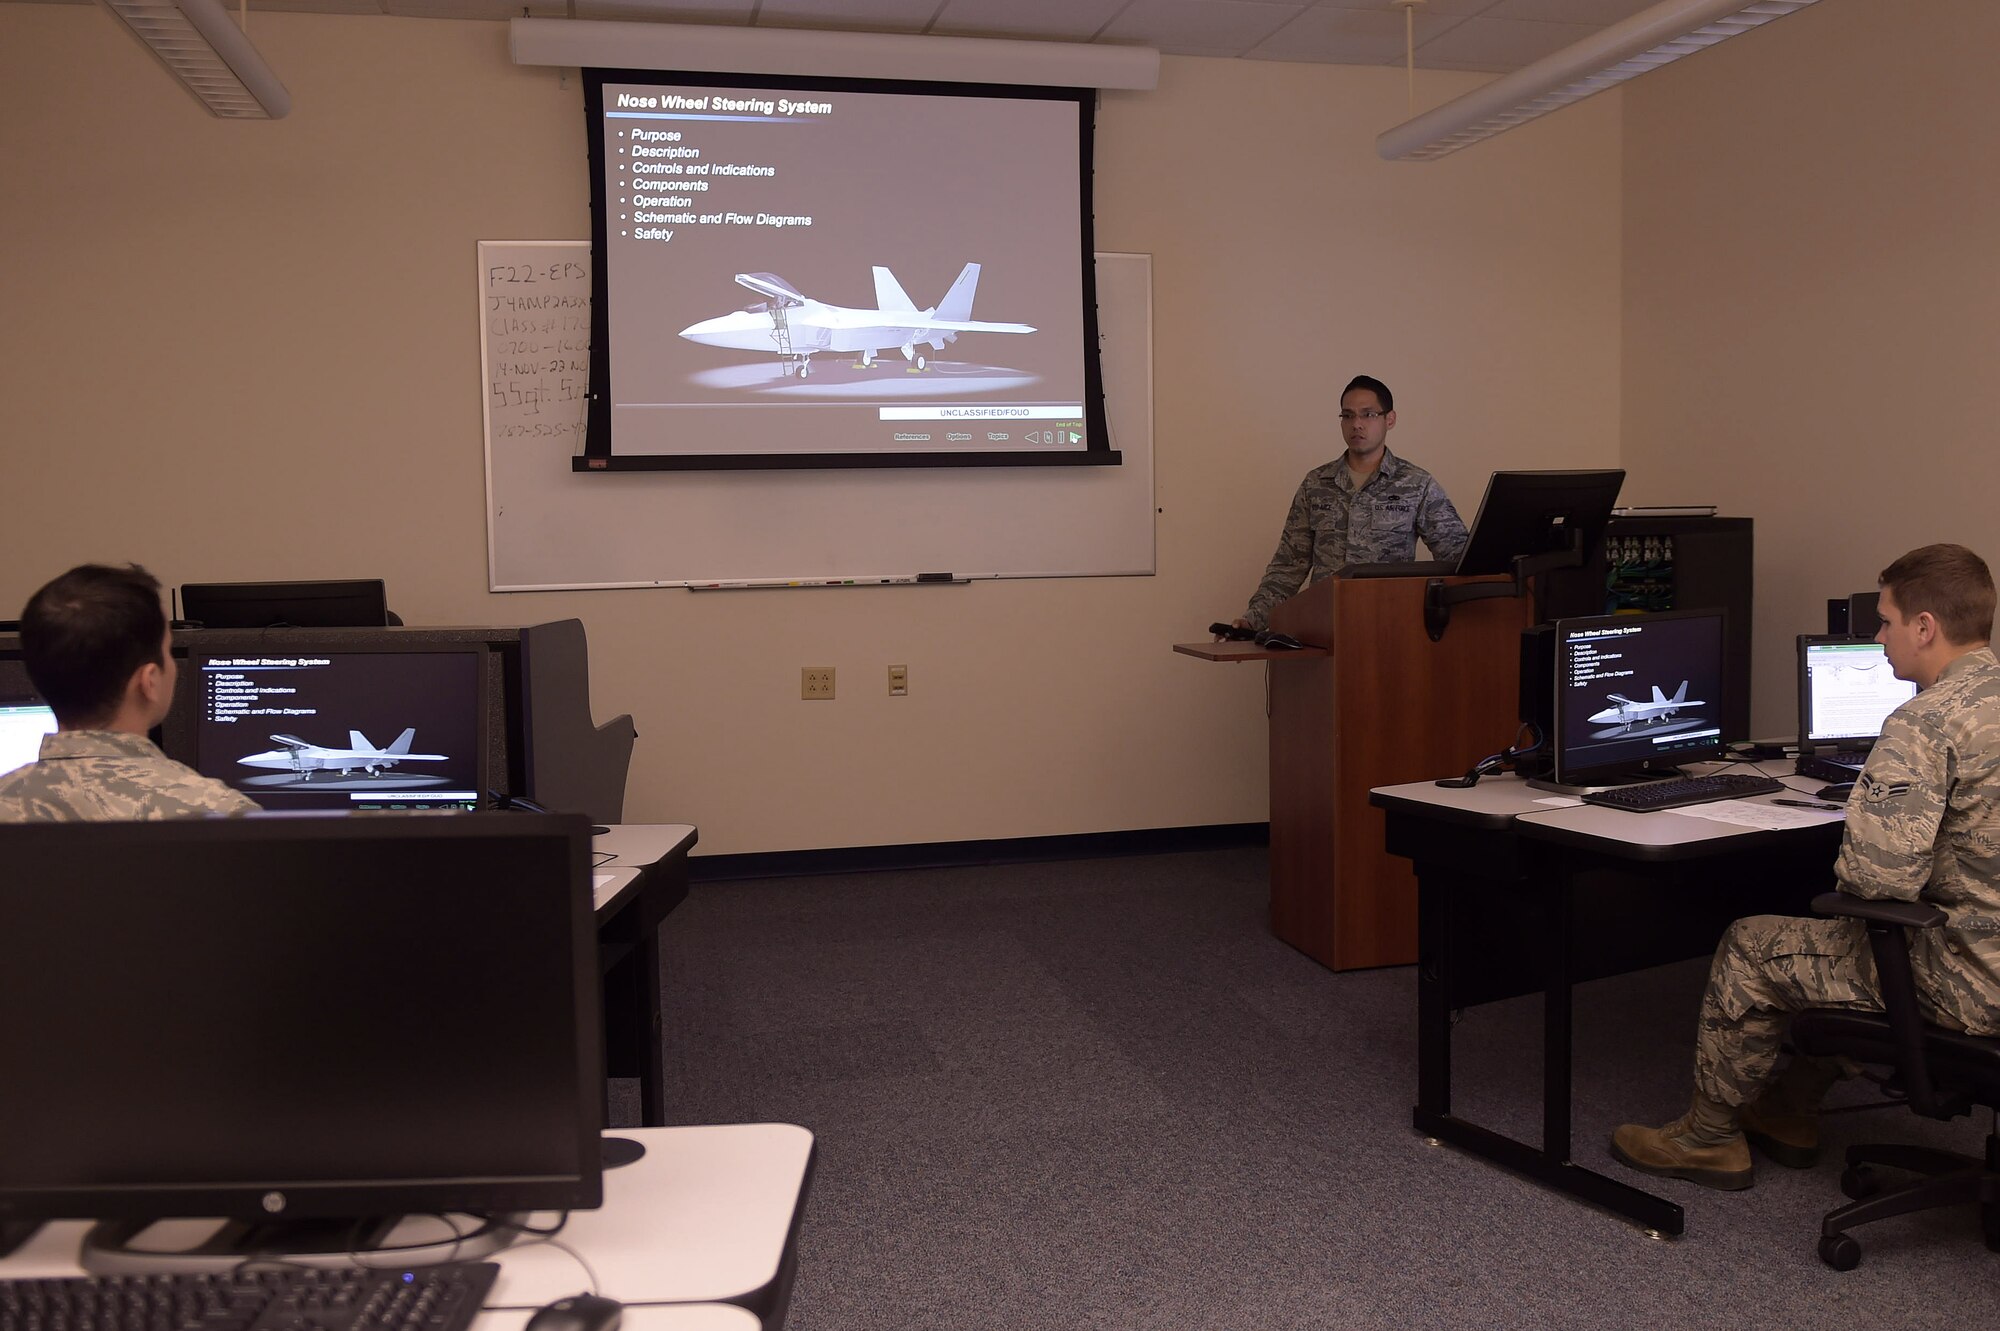 U.S. Air Force Staff Sgt. Guillermo Soto Arce, F-22 Raptor Electrical System Maintenance instructor, teaches students in an advanced training course at Joint Base Langley-Eustis, Va., Nov. 17, 2016. During their time in the course, students will get classroom time with their instructors, going in-depth into the information they will need to repair, examine or report on their aircraft. After the classroom time, they will get hands-on experience with training equipment as well as some active aircraft. (U.S. Air Force photo by Senior Airman Kimberly Nagle)